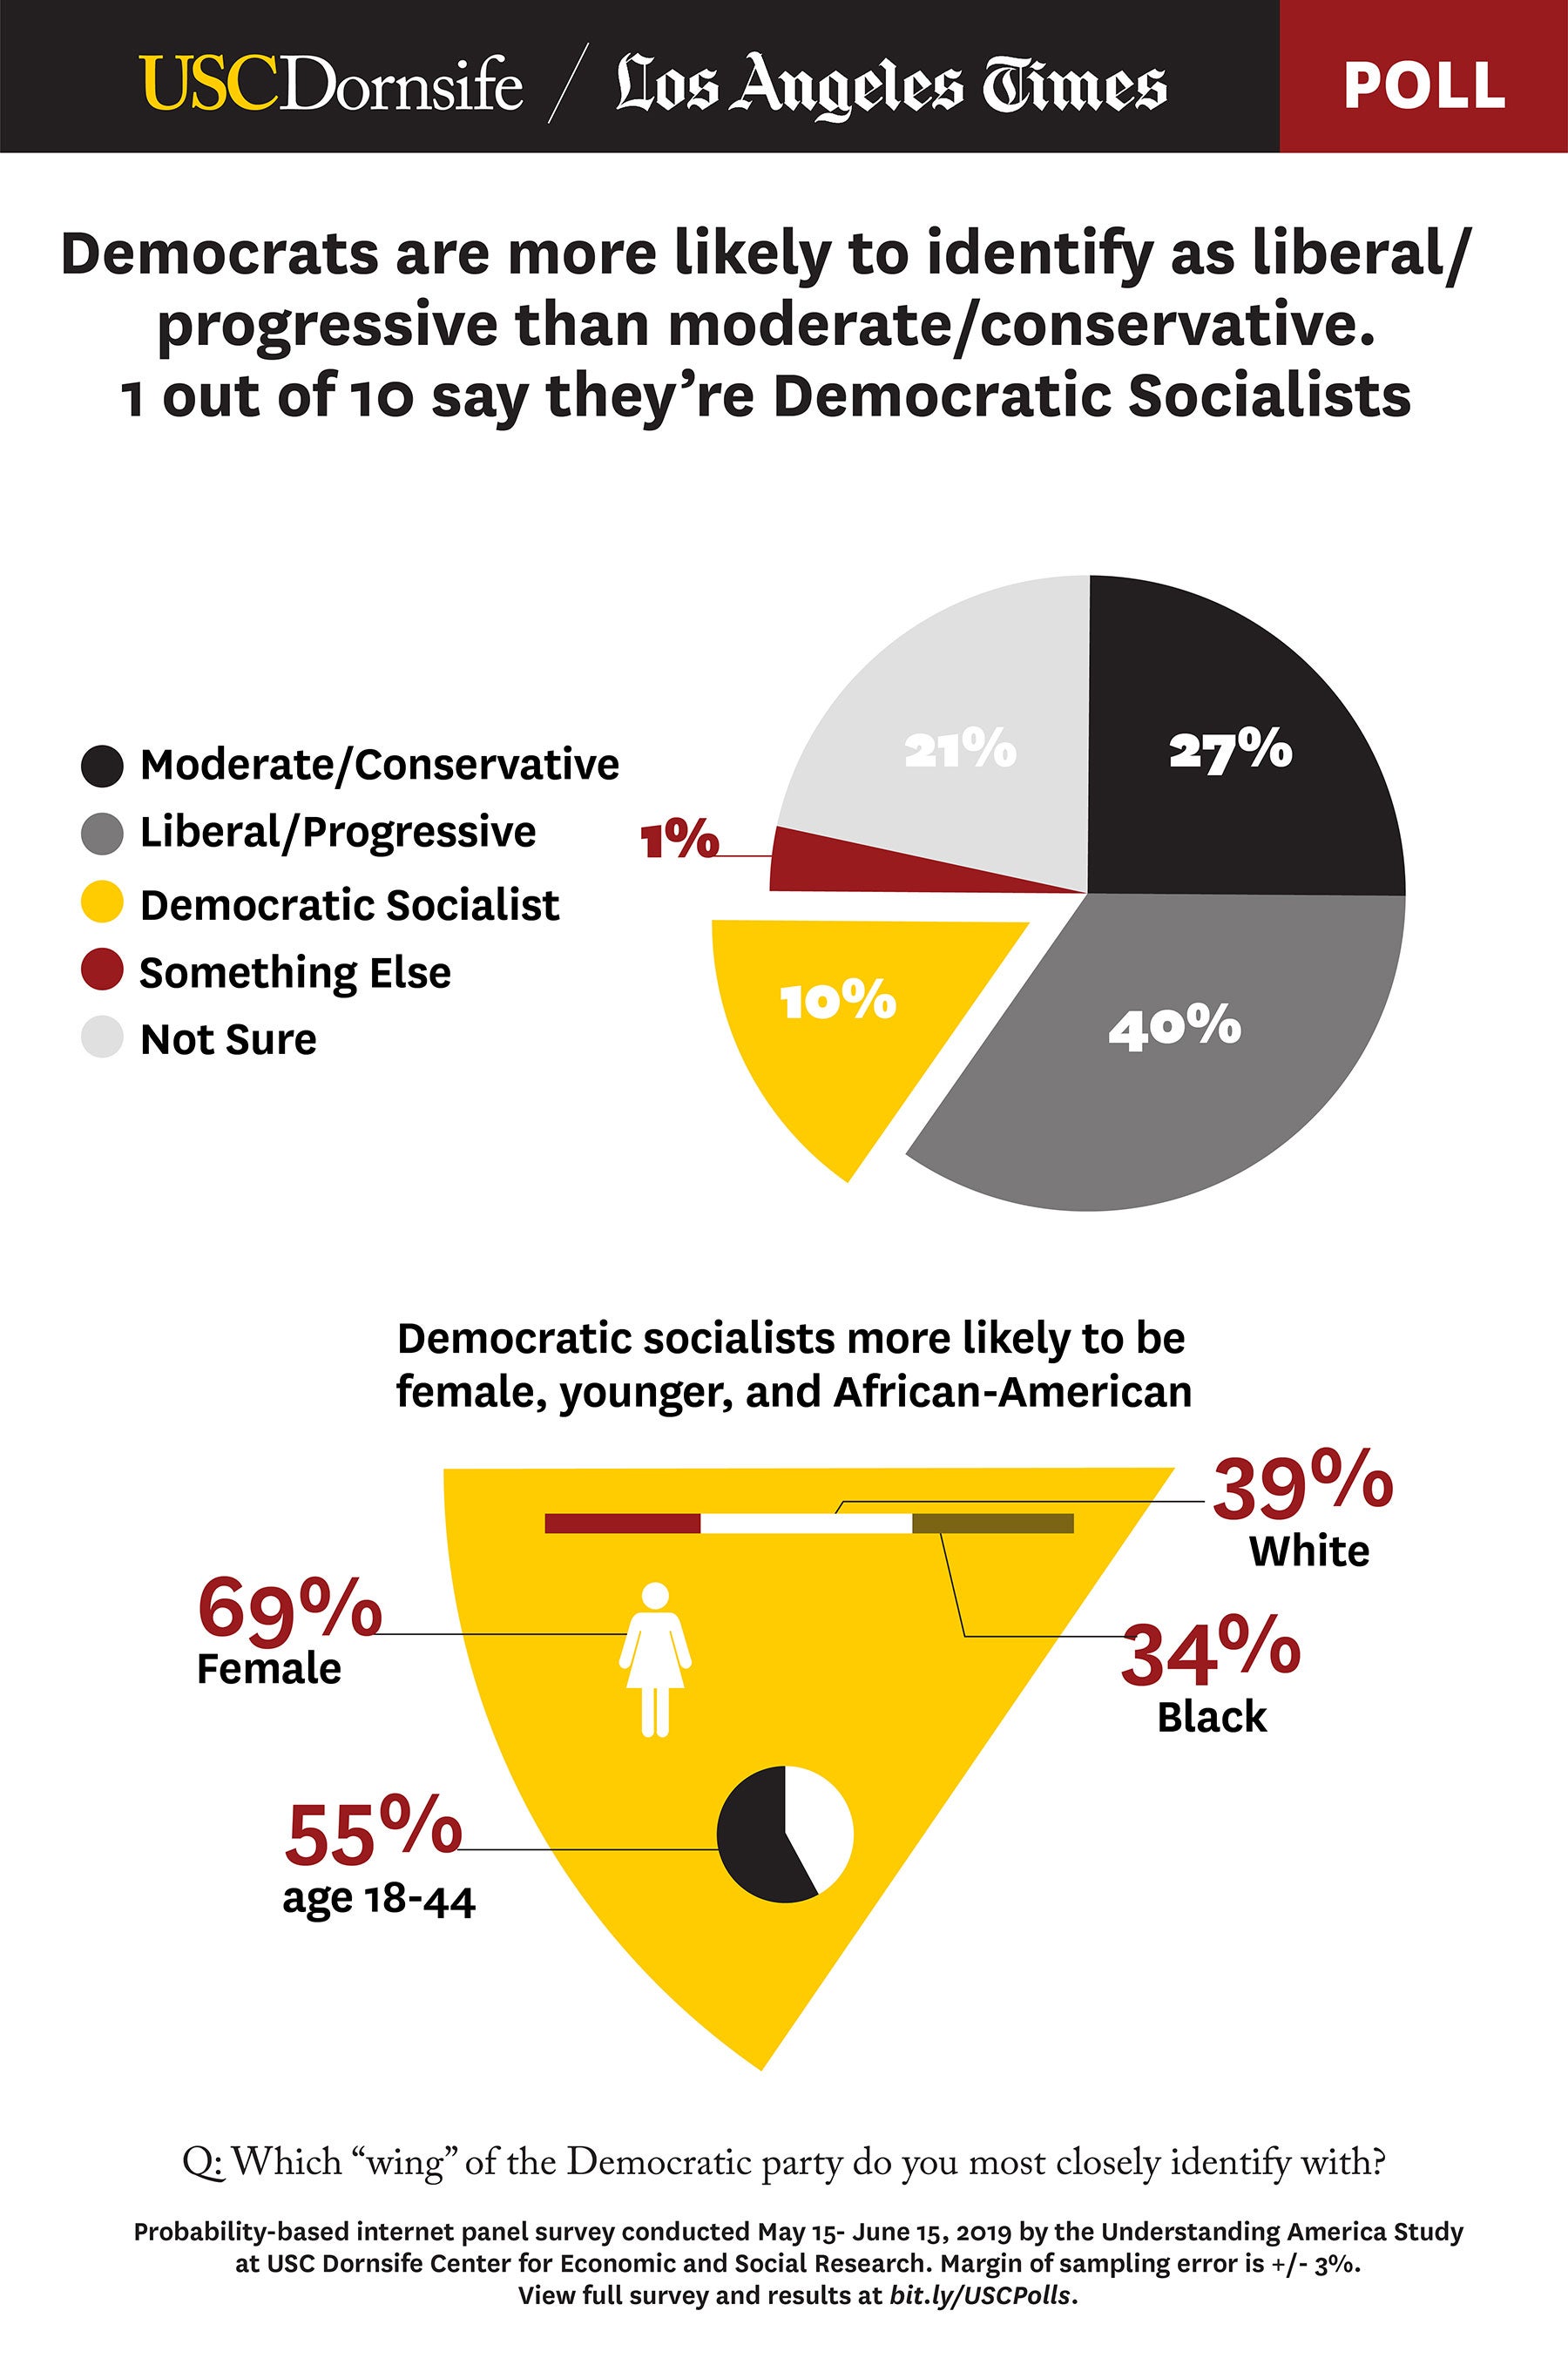 Graphic: Which "wing" of the Democratic party do you identify with?